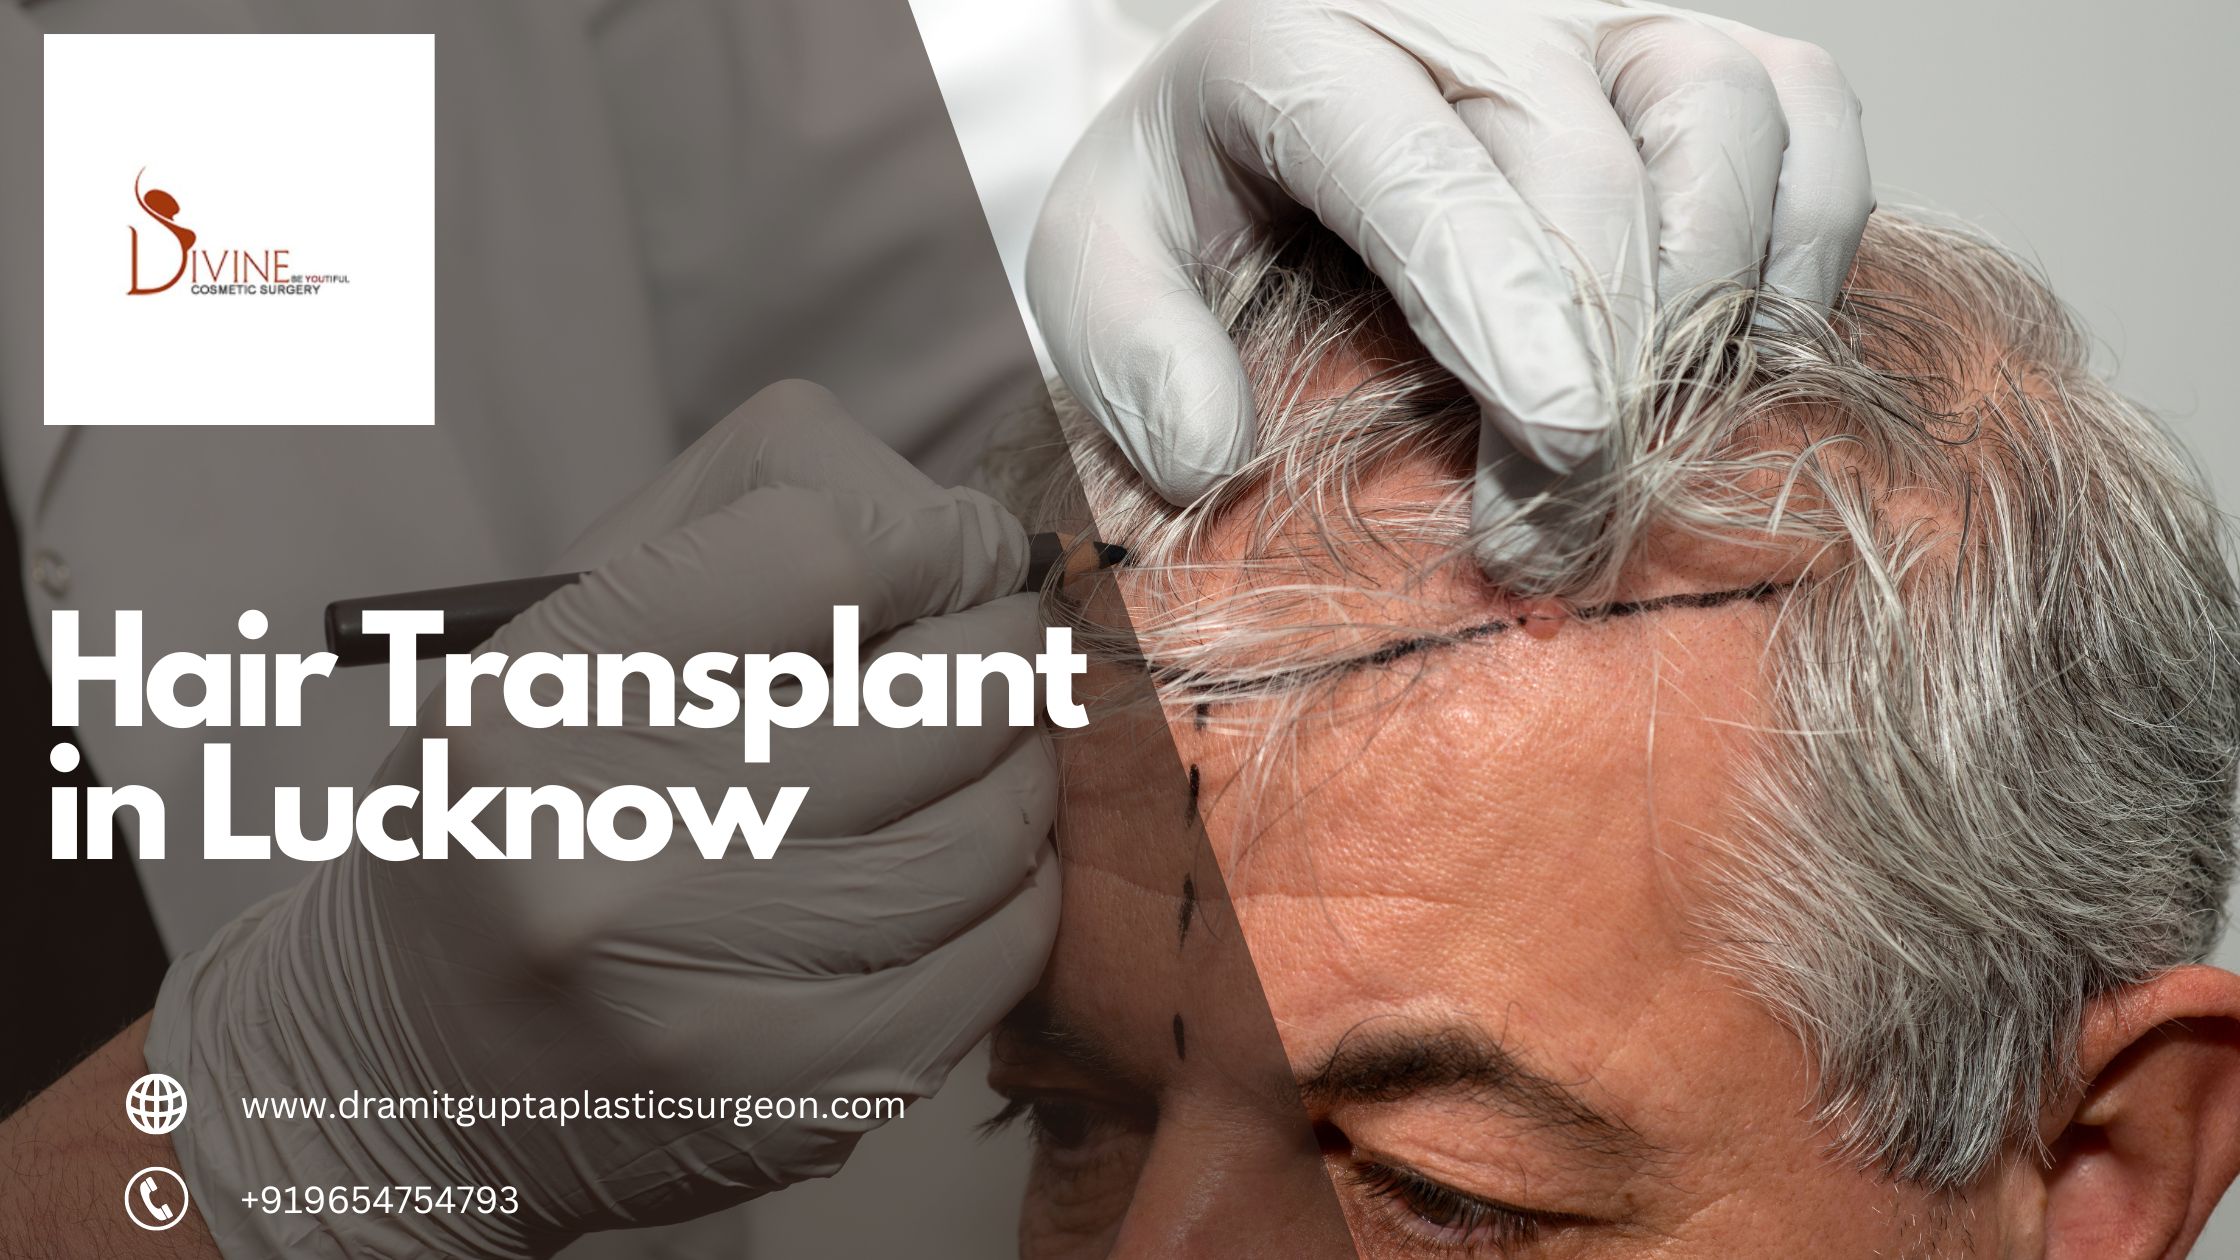 Step-by-Step Guide to a Hair Transplant in Lucknow